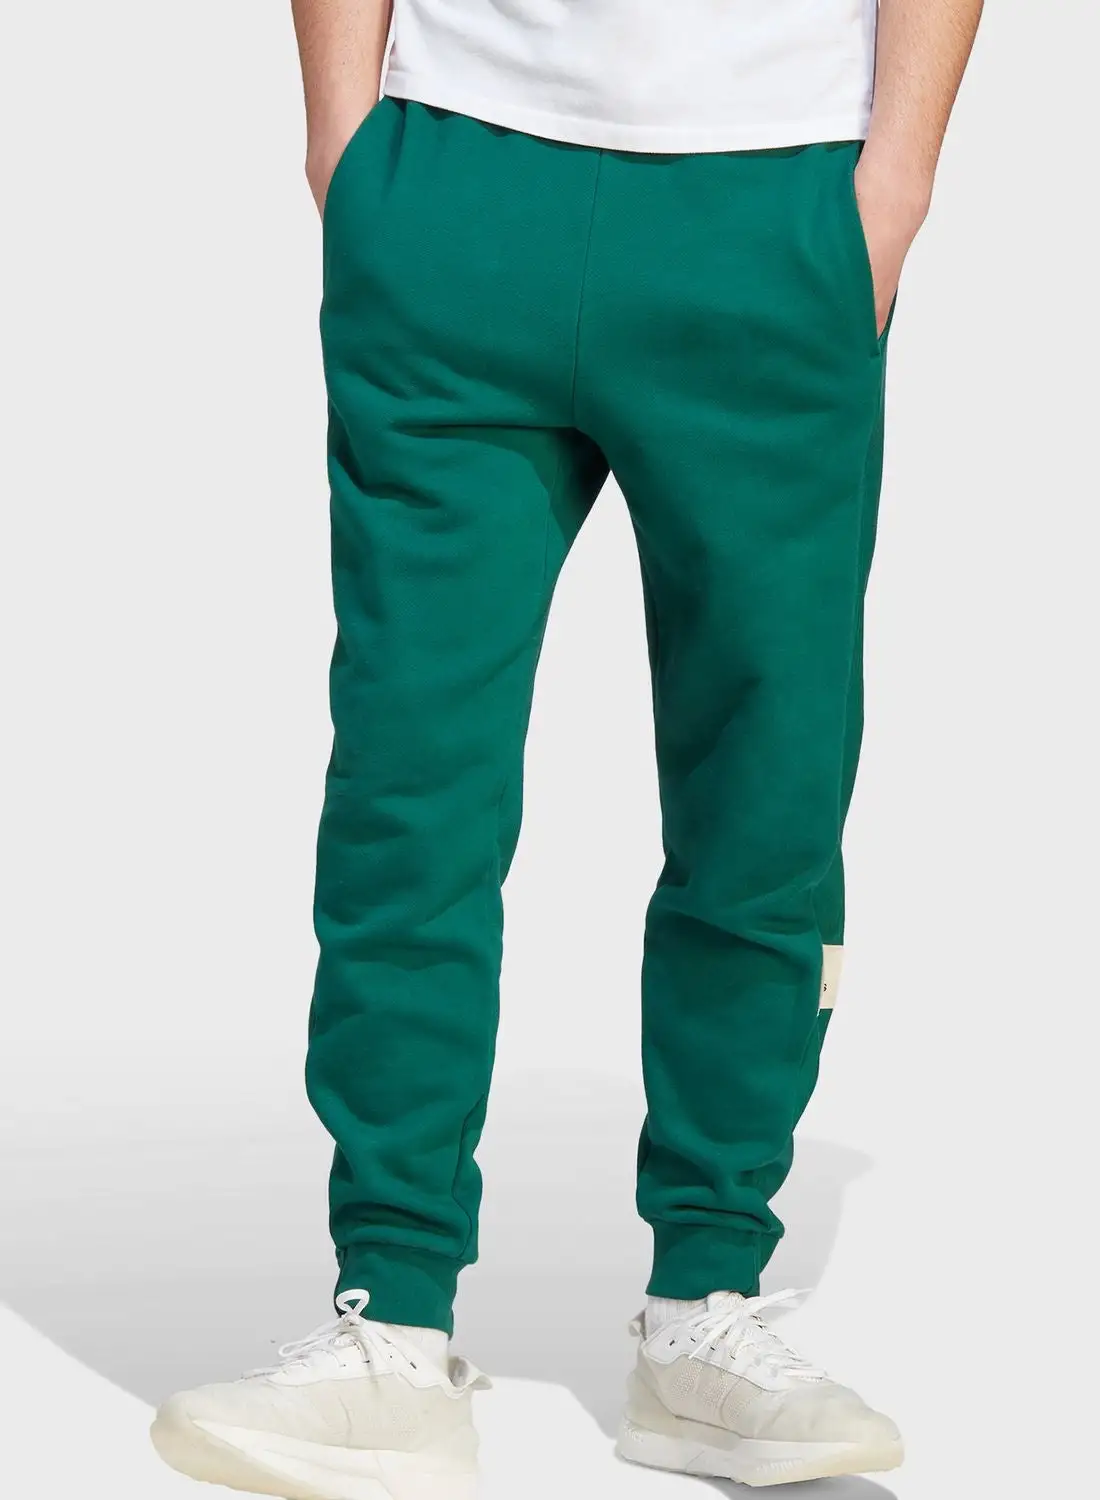 Adidas Lounge French Terry Pants